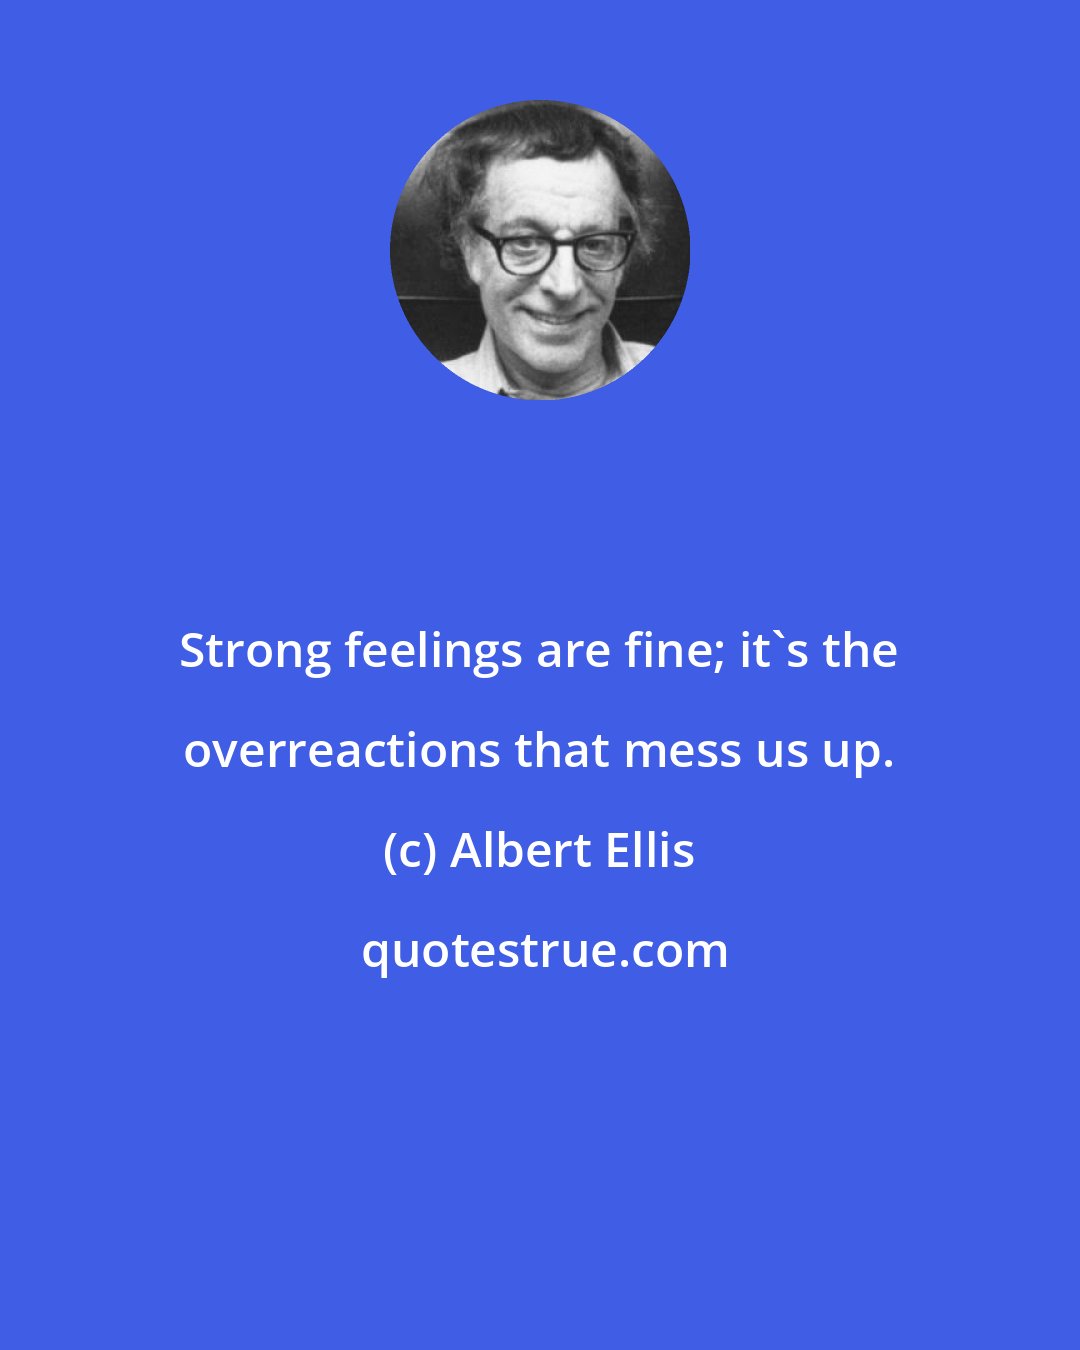 Albert Ellis: Strong feelings are fine; it's the overreactions that mess us up.